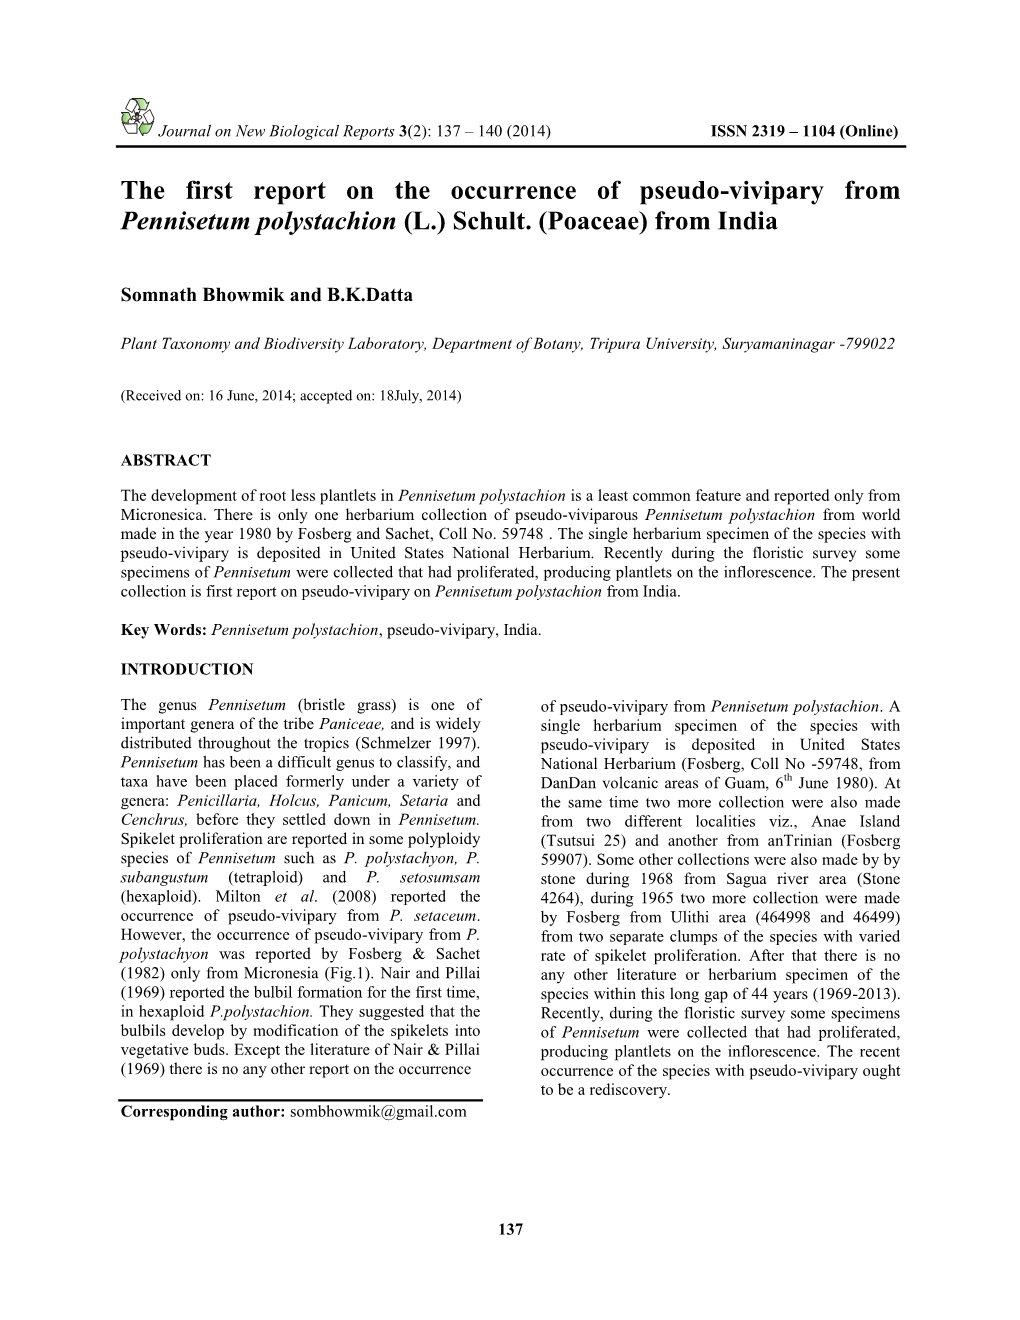 The First Report on the Occurrence of Pseudo-Vivipary from Pennisetum Polystachion (L.) Schult